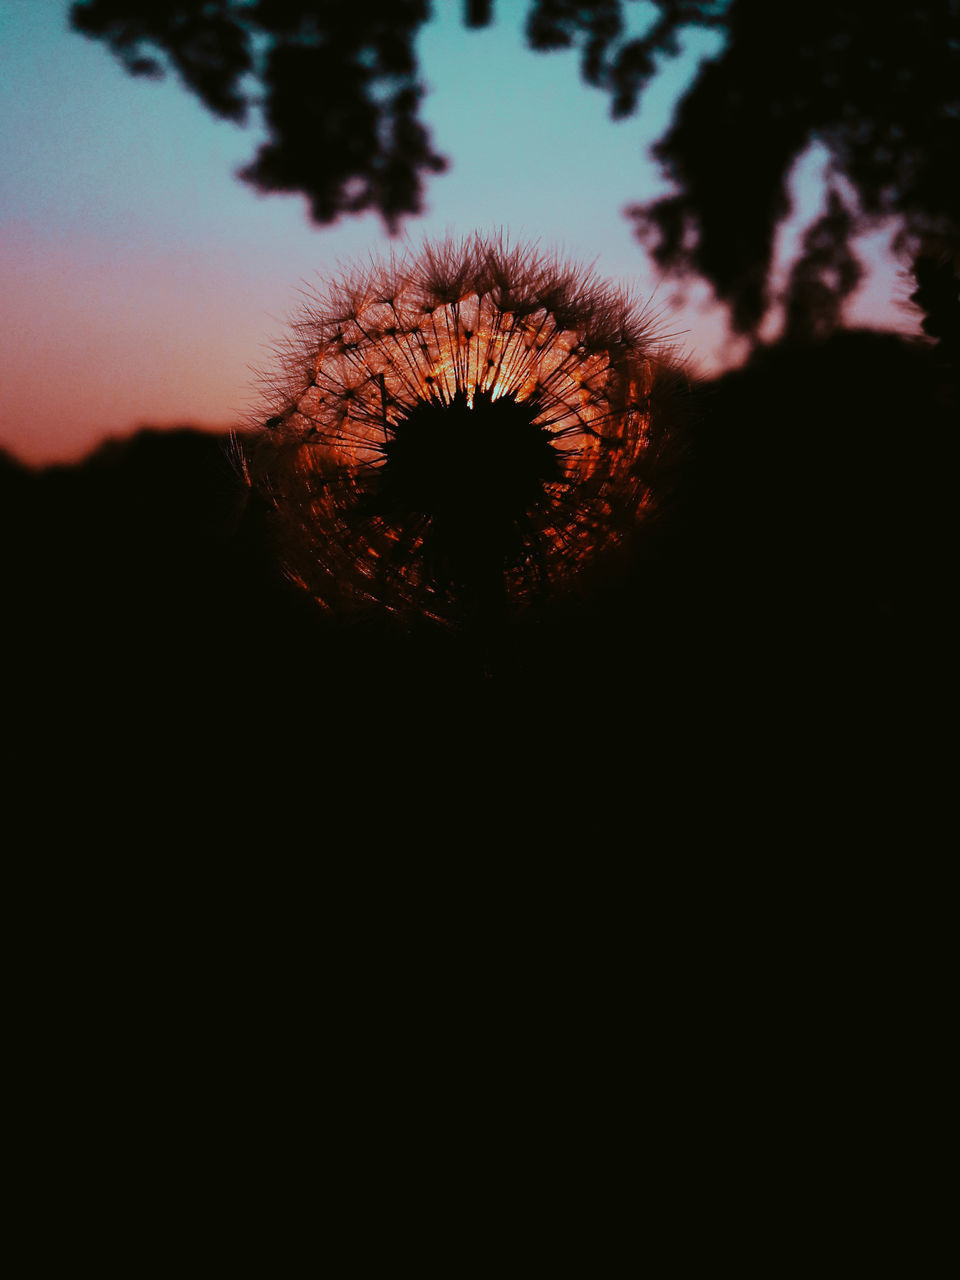 CLOSE-UP OF SILHOUETTE DANDELION FLOWERS AGAINST SUNSET